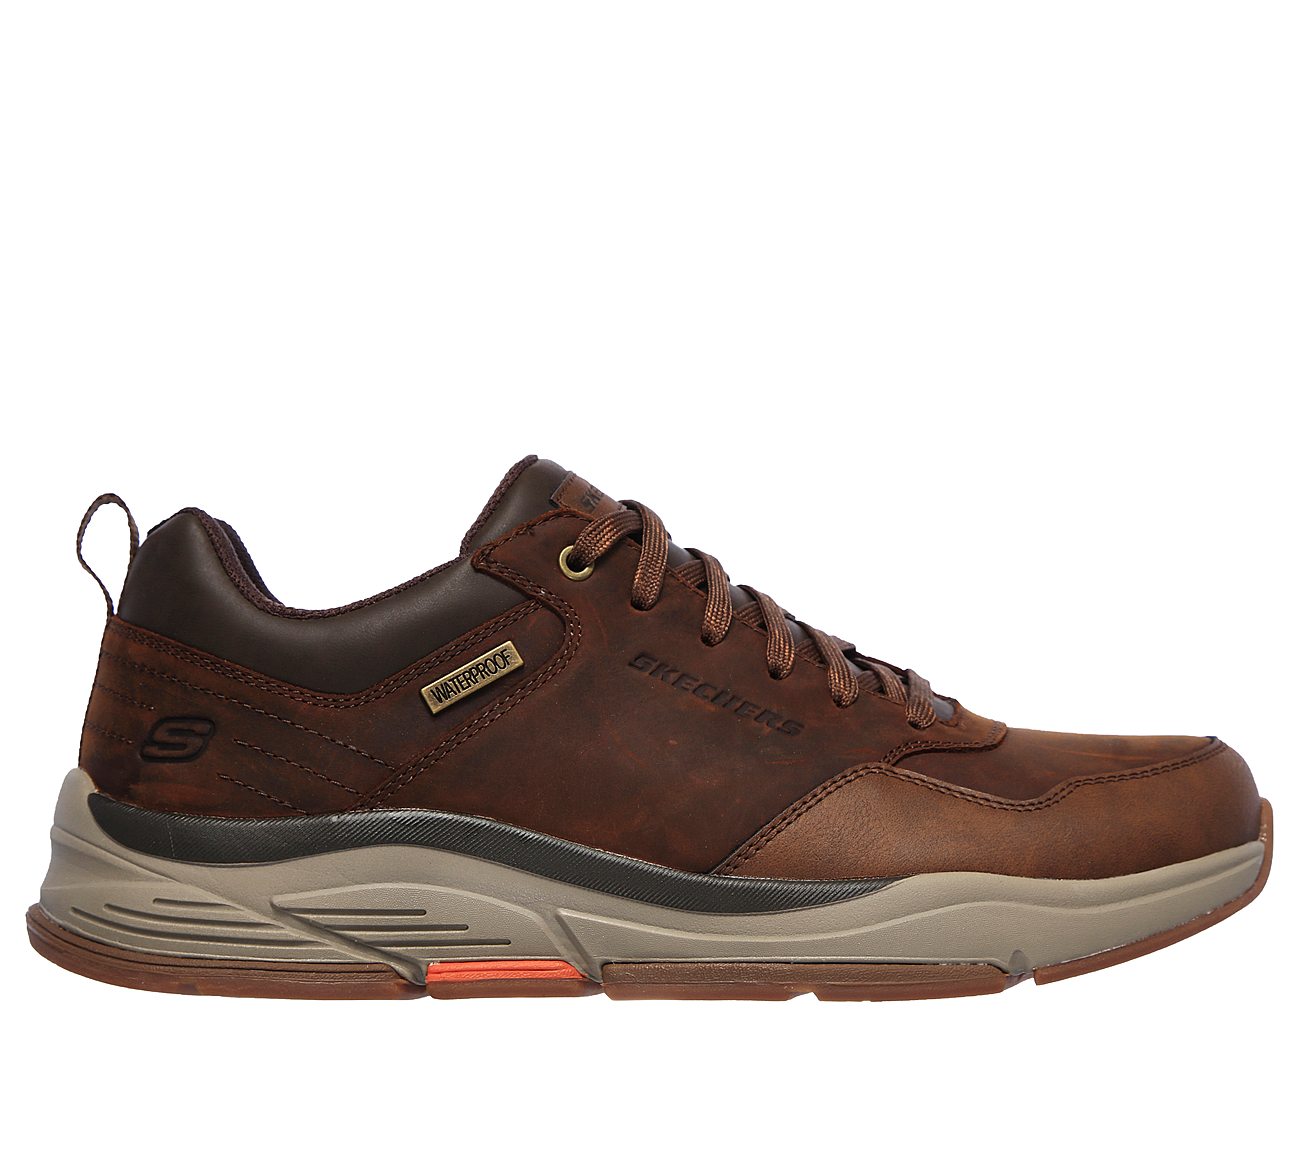 skechers relaxed fit hombre